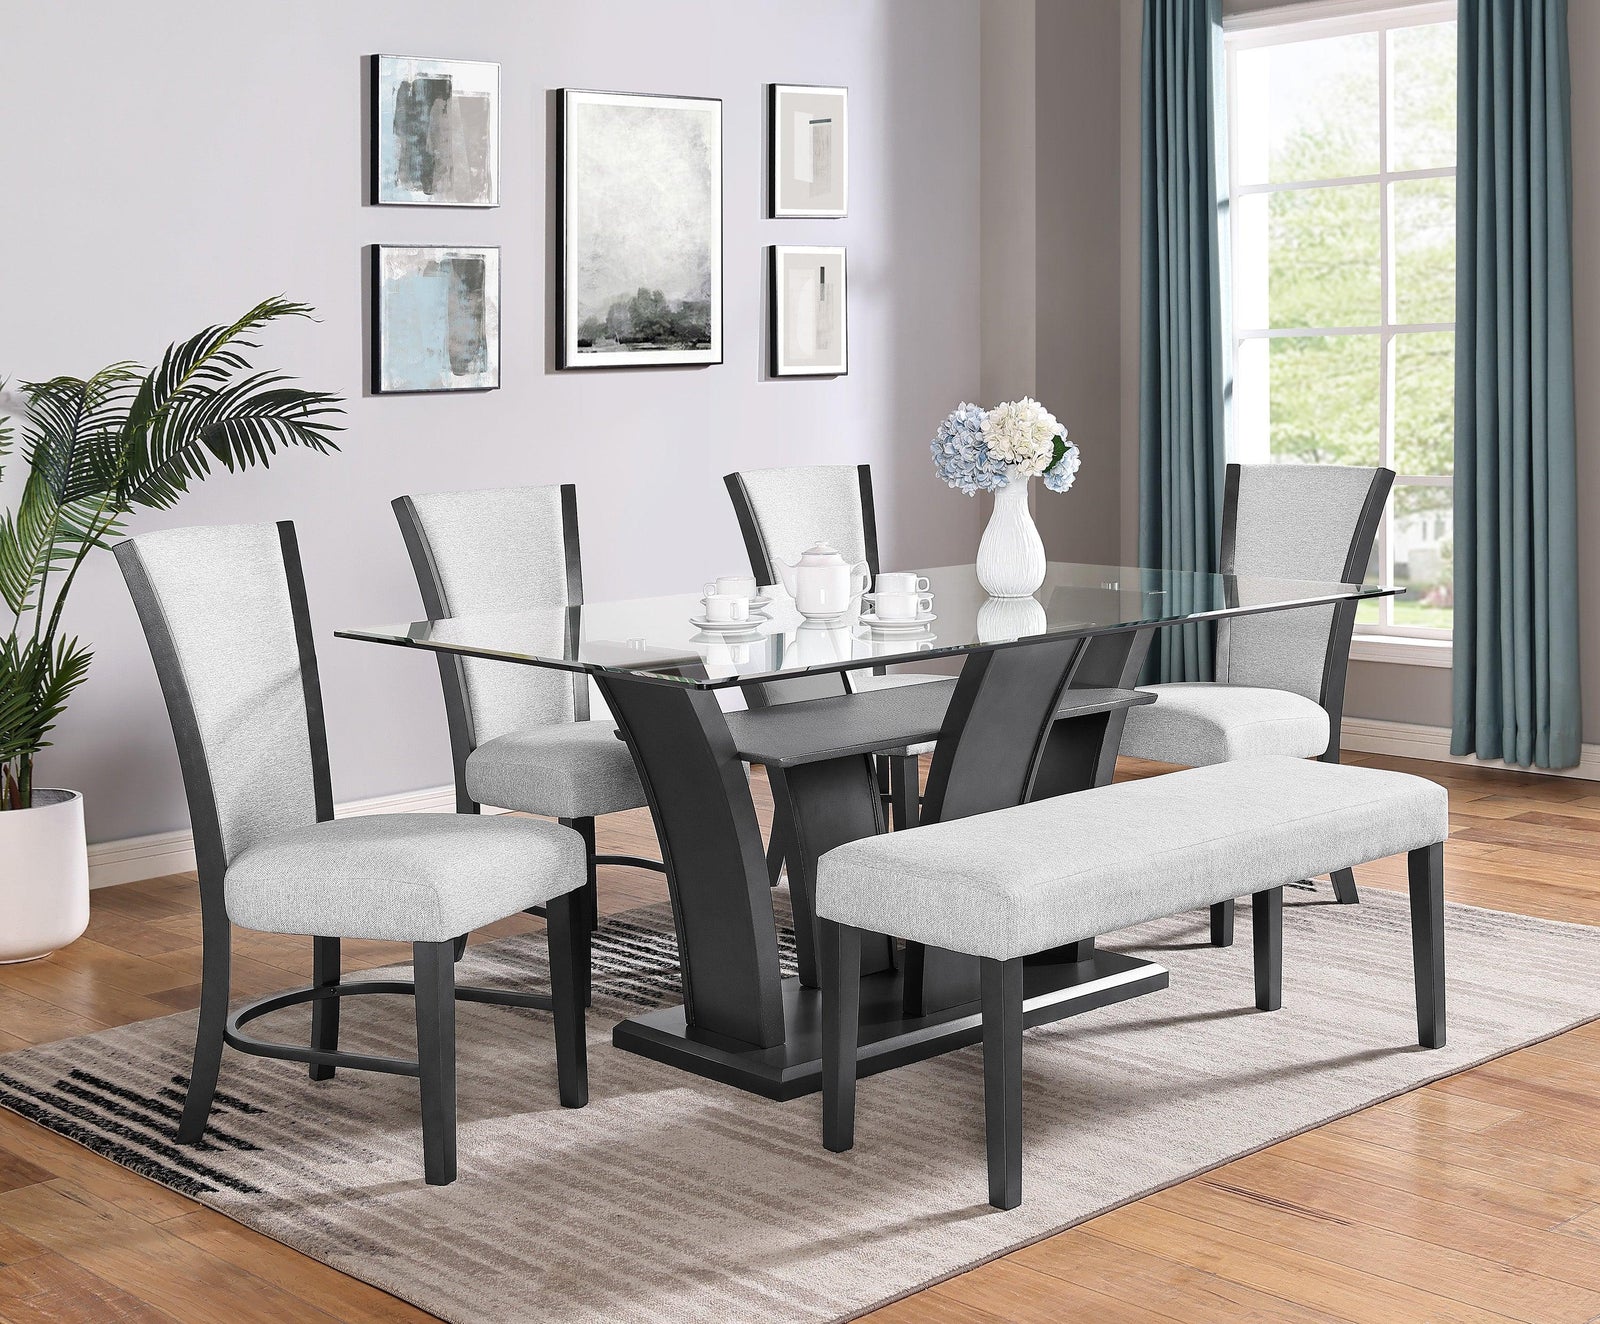 Camelia White/Gray Modern Solid Wood Glass Fabric Upholstered Dining Room Set - Ella Furniture